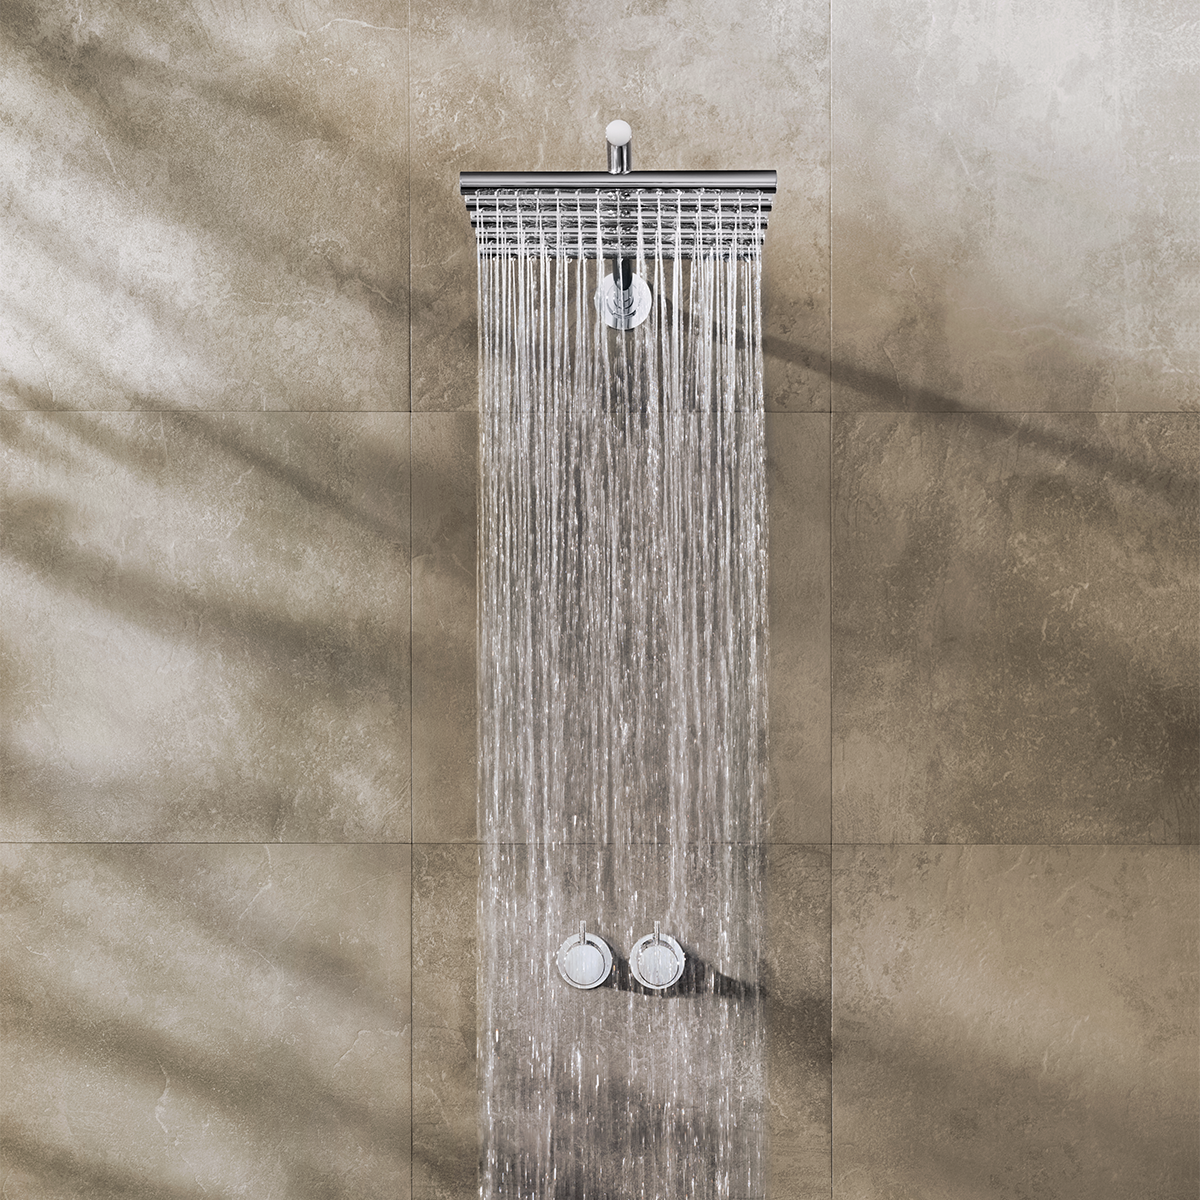 Vola 5251 Thermostatic Shower Mixer